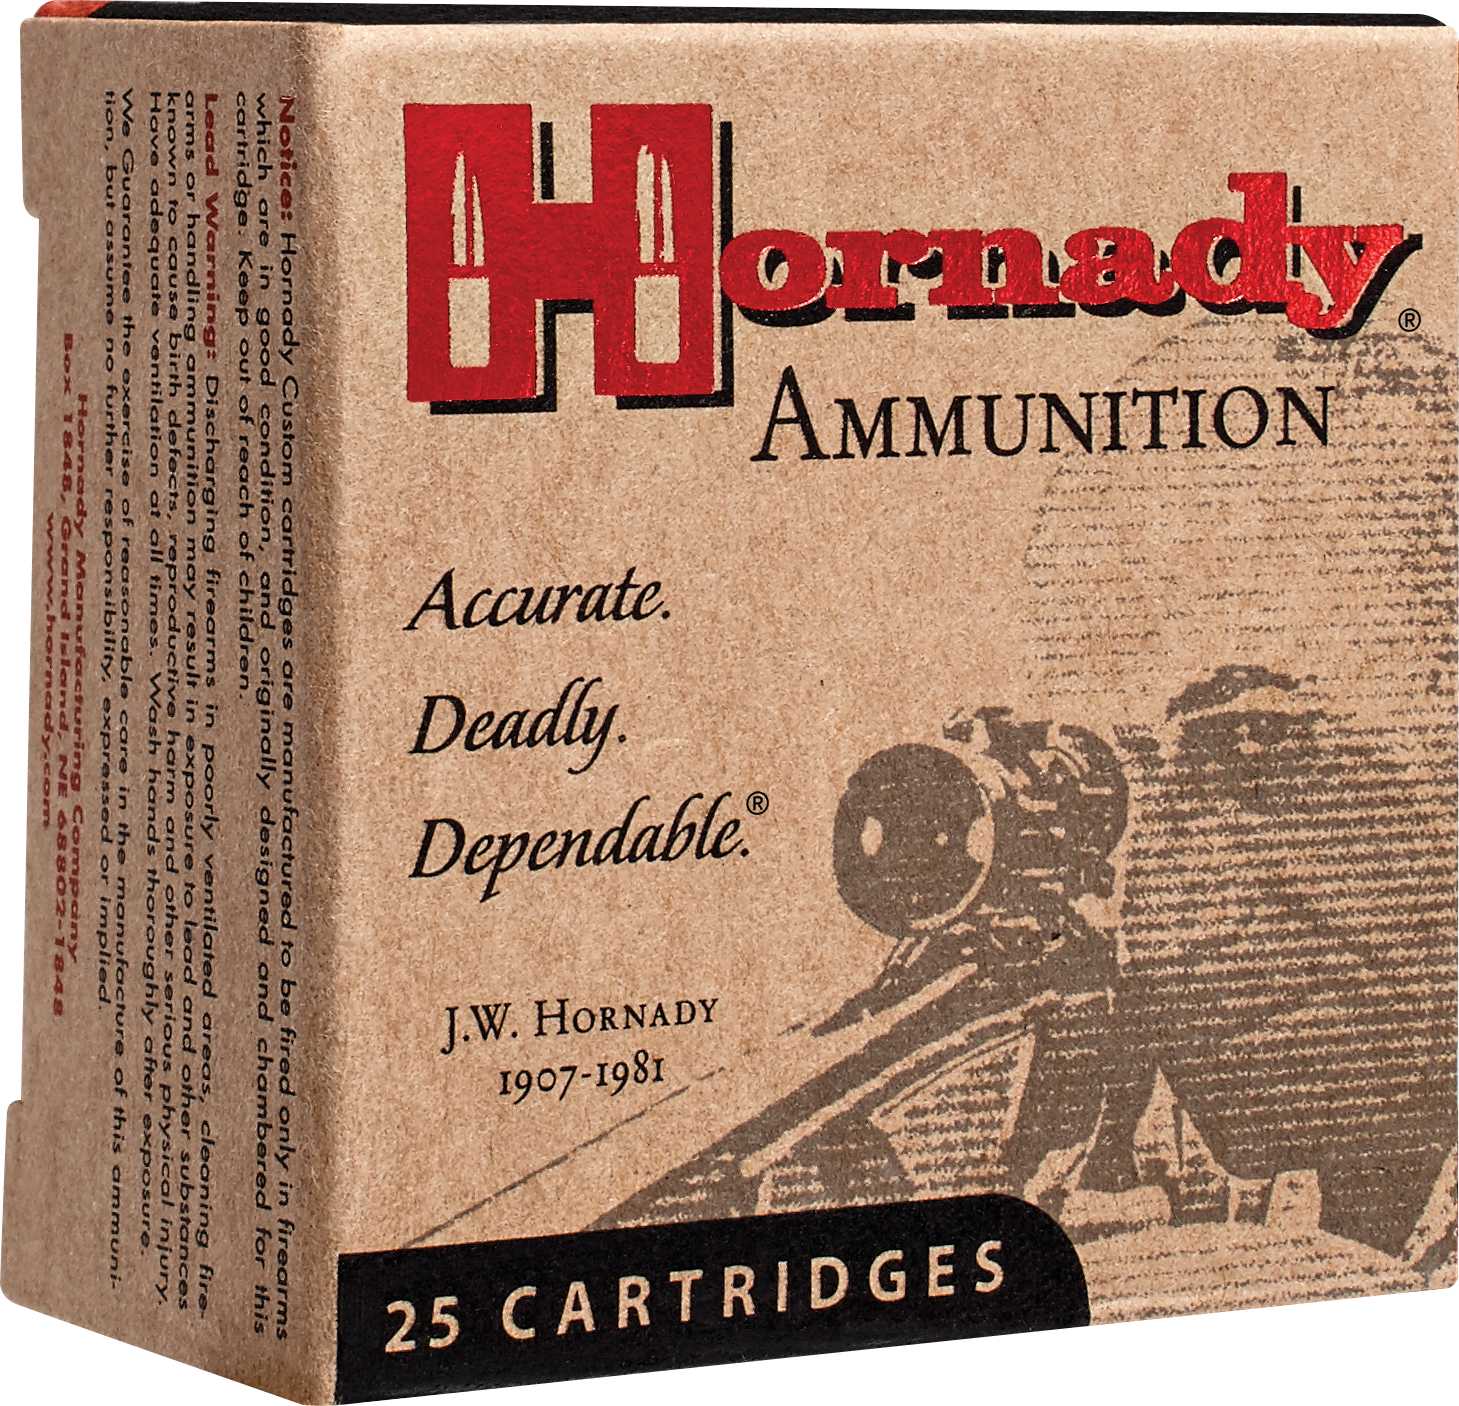 454 Casull 20 Rounds Ammunition Hornady 300 Grain Jacketed Hollow Point